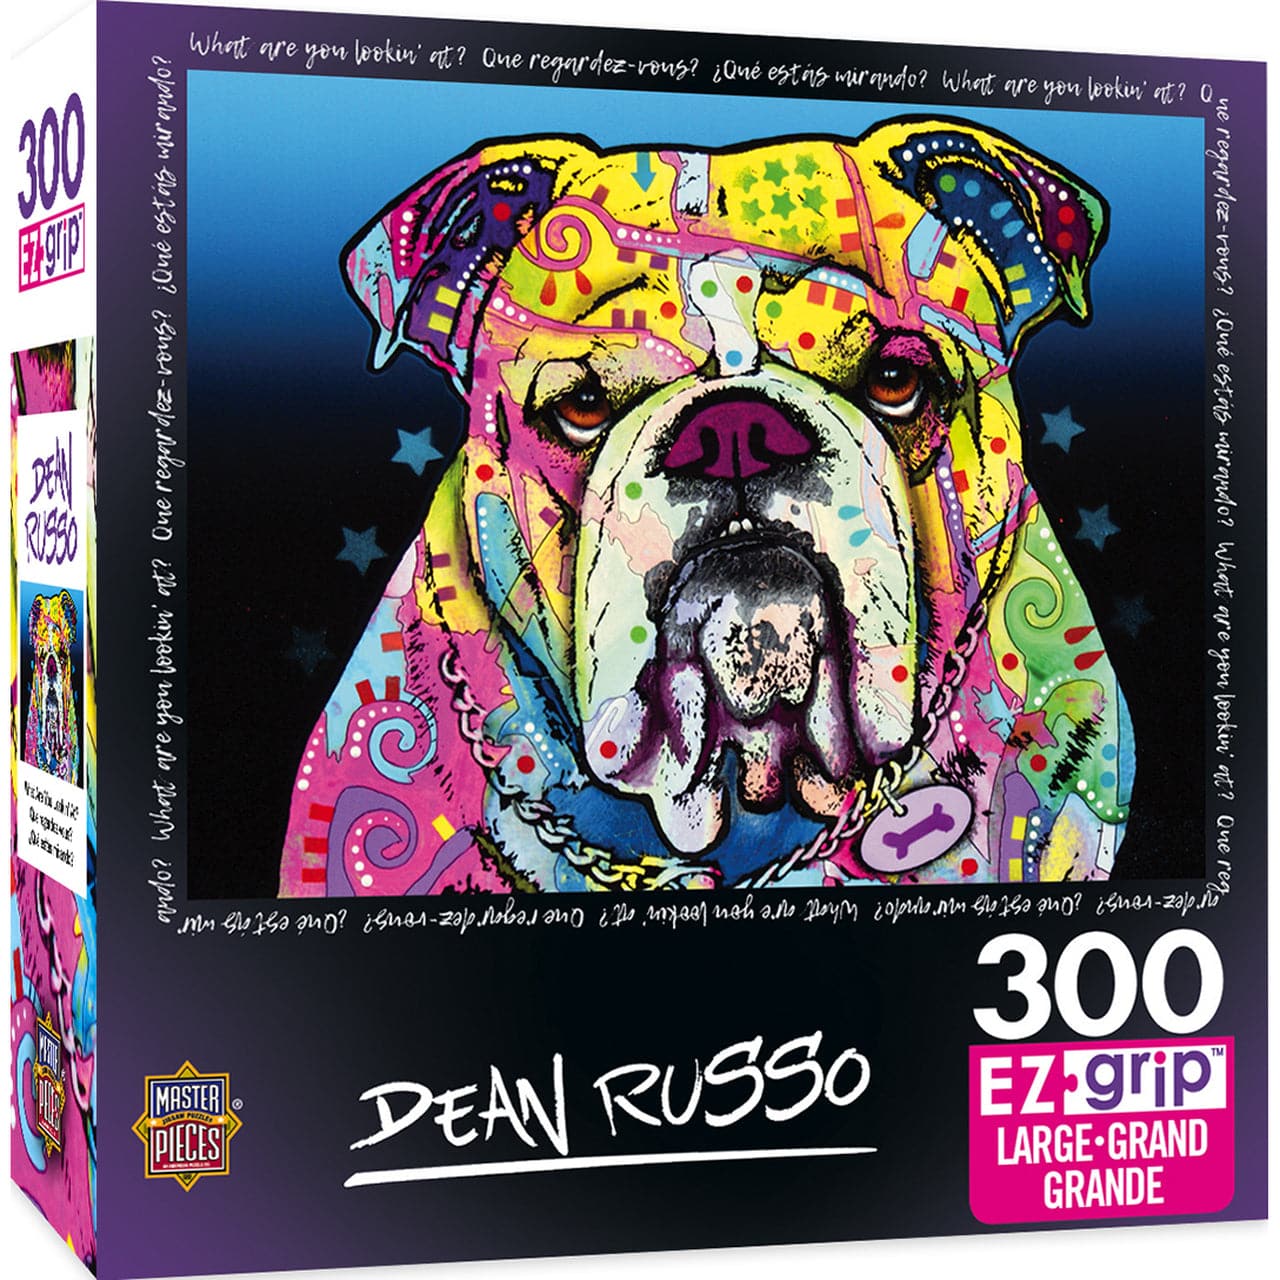 MasterPieces-Dean Russo - What Are You Looking At? - 300 Piece EZGrip Puzzle-31820-Legacy Toys